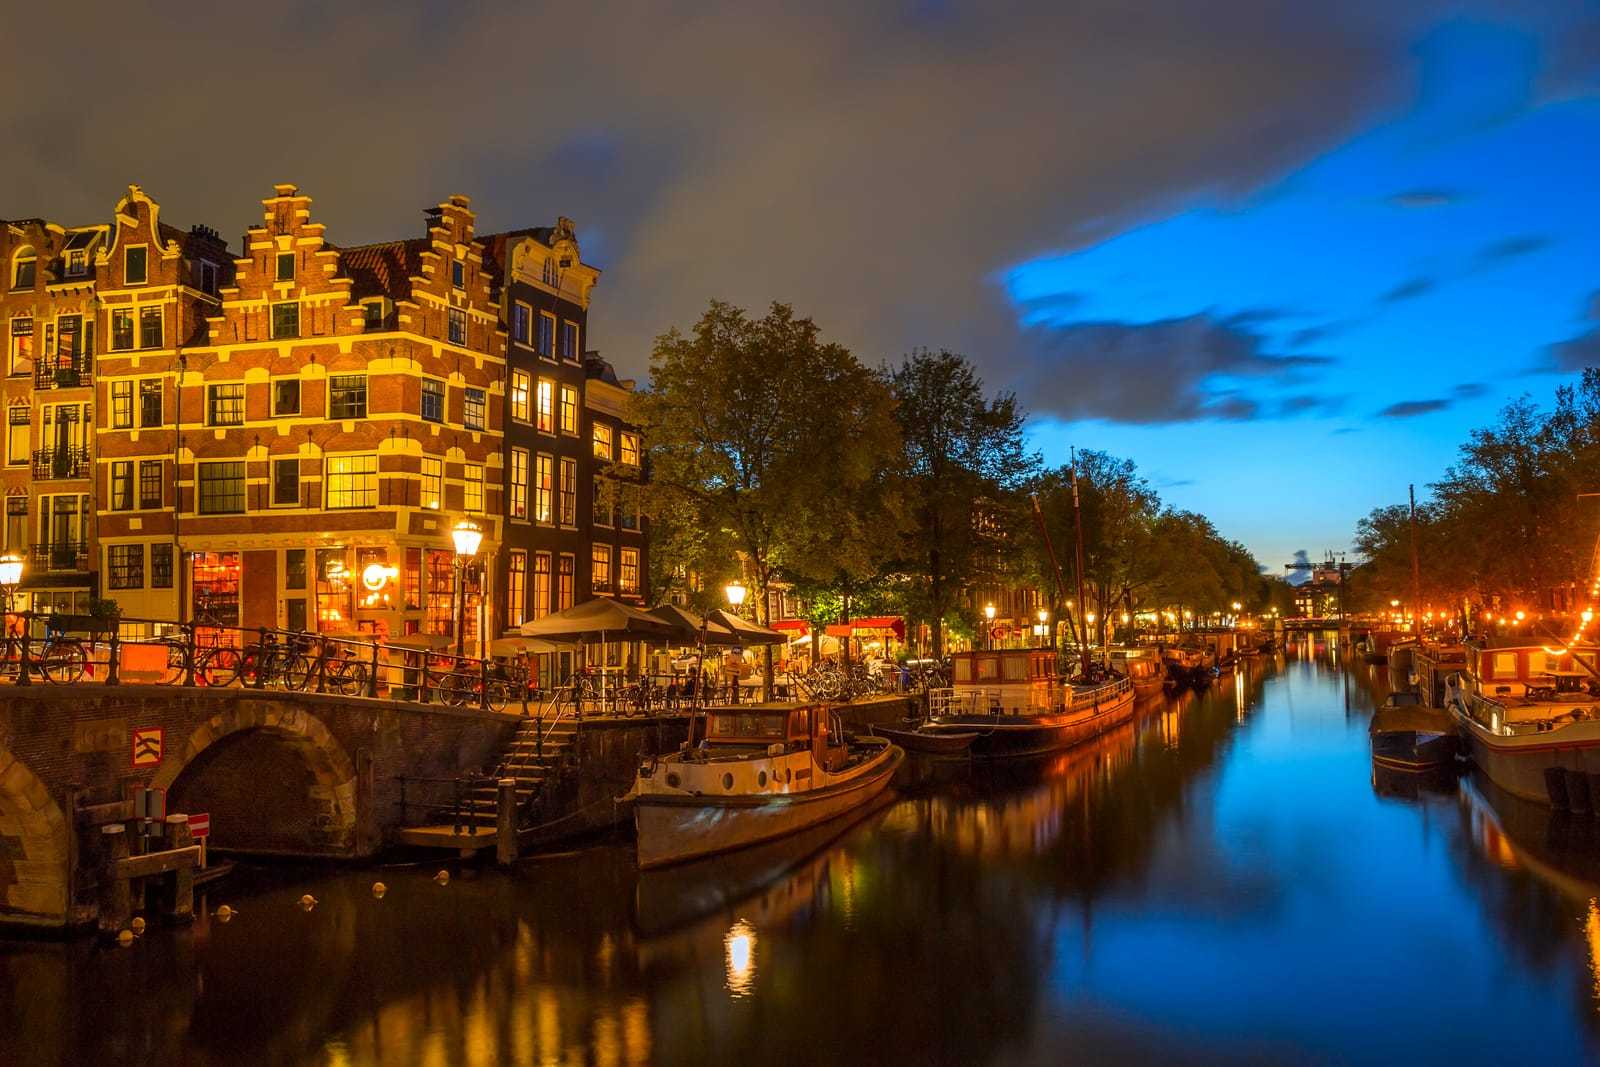 Canal Cruise Amsterdam at Night - Read this before you book tickets!